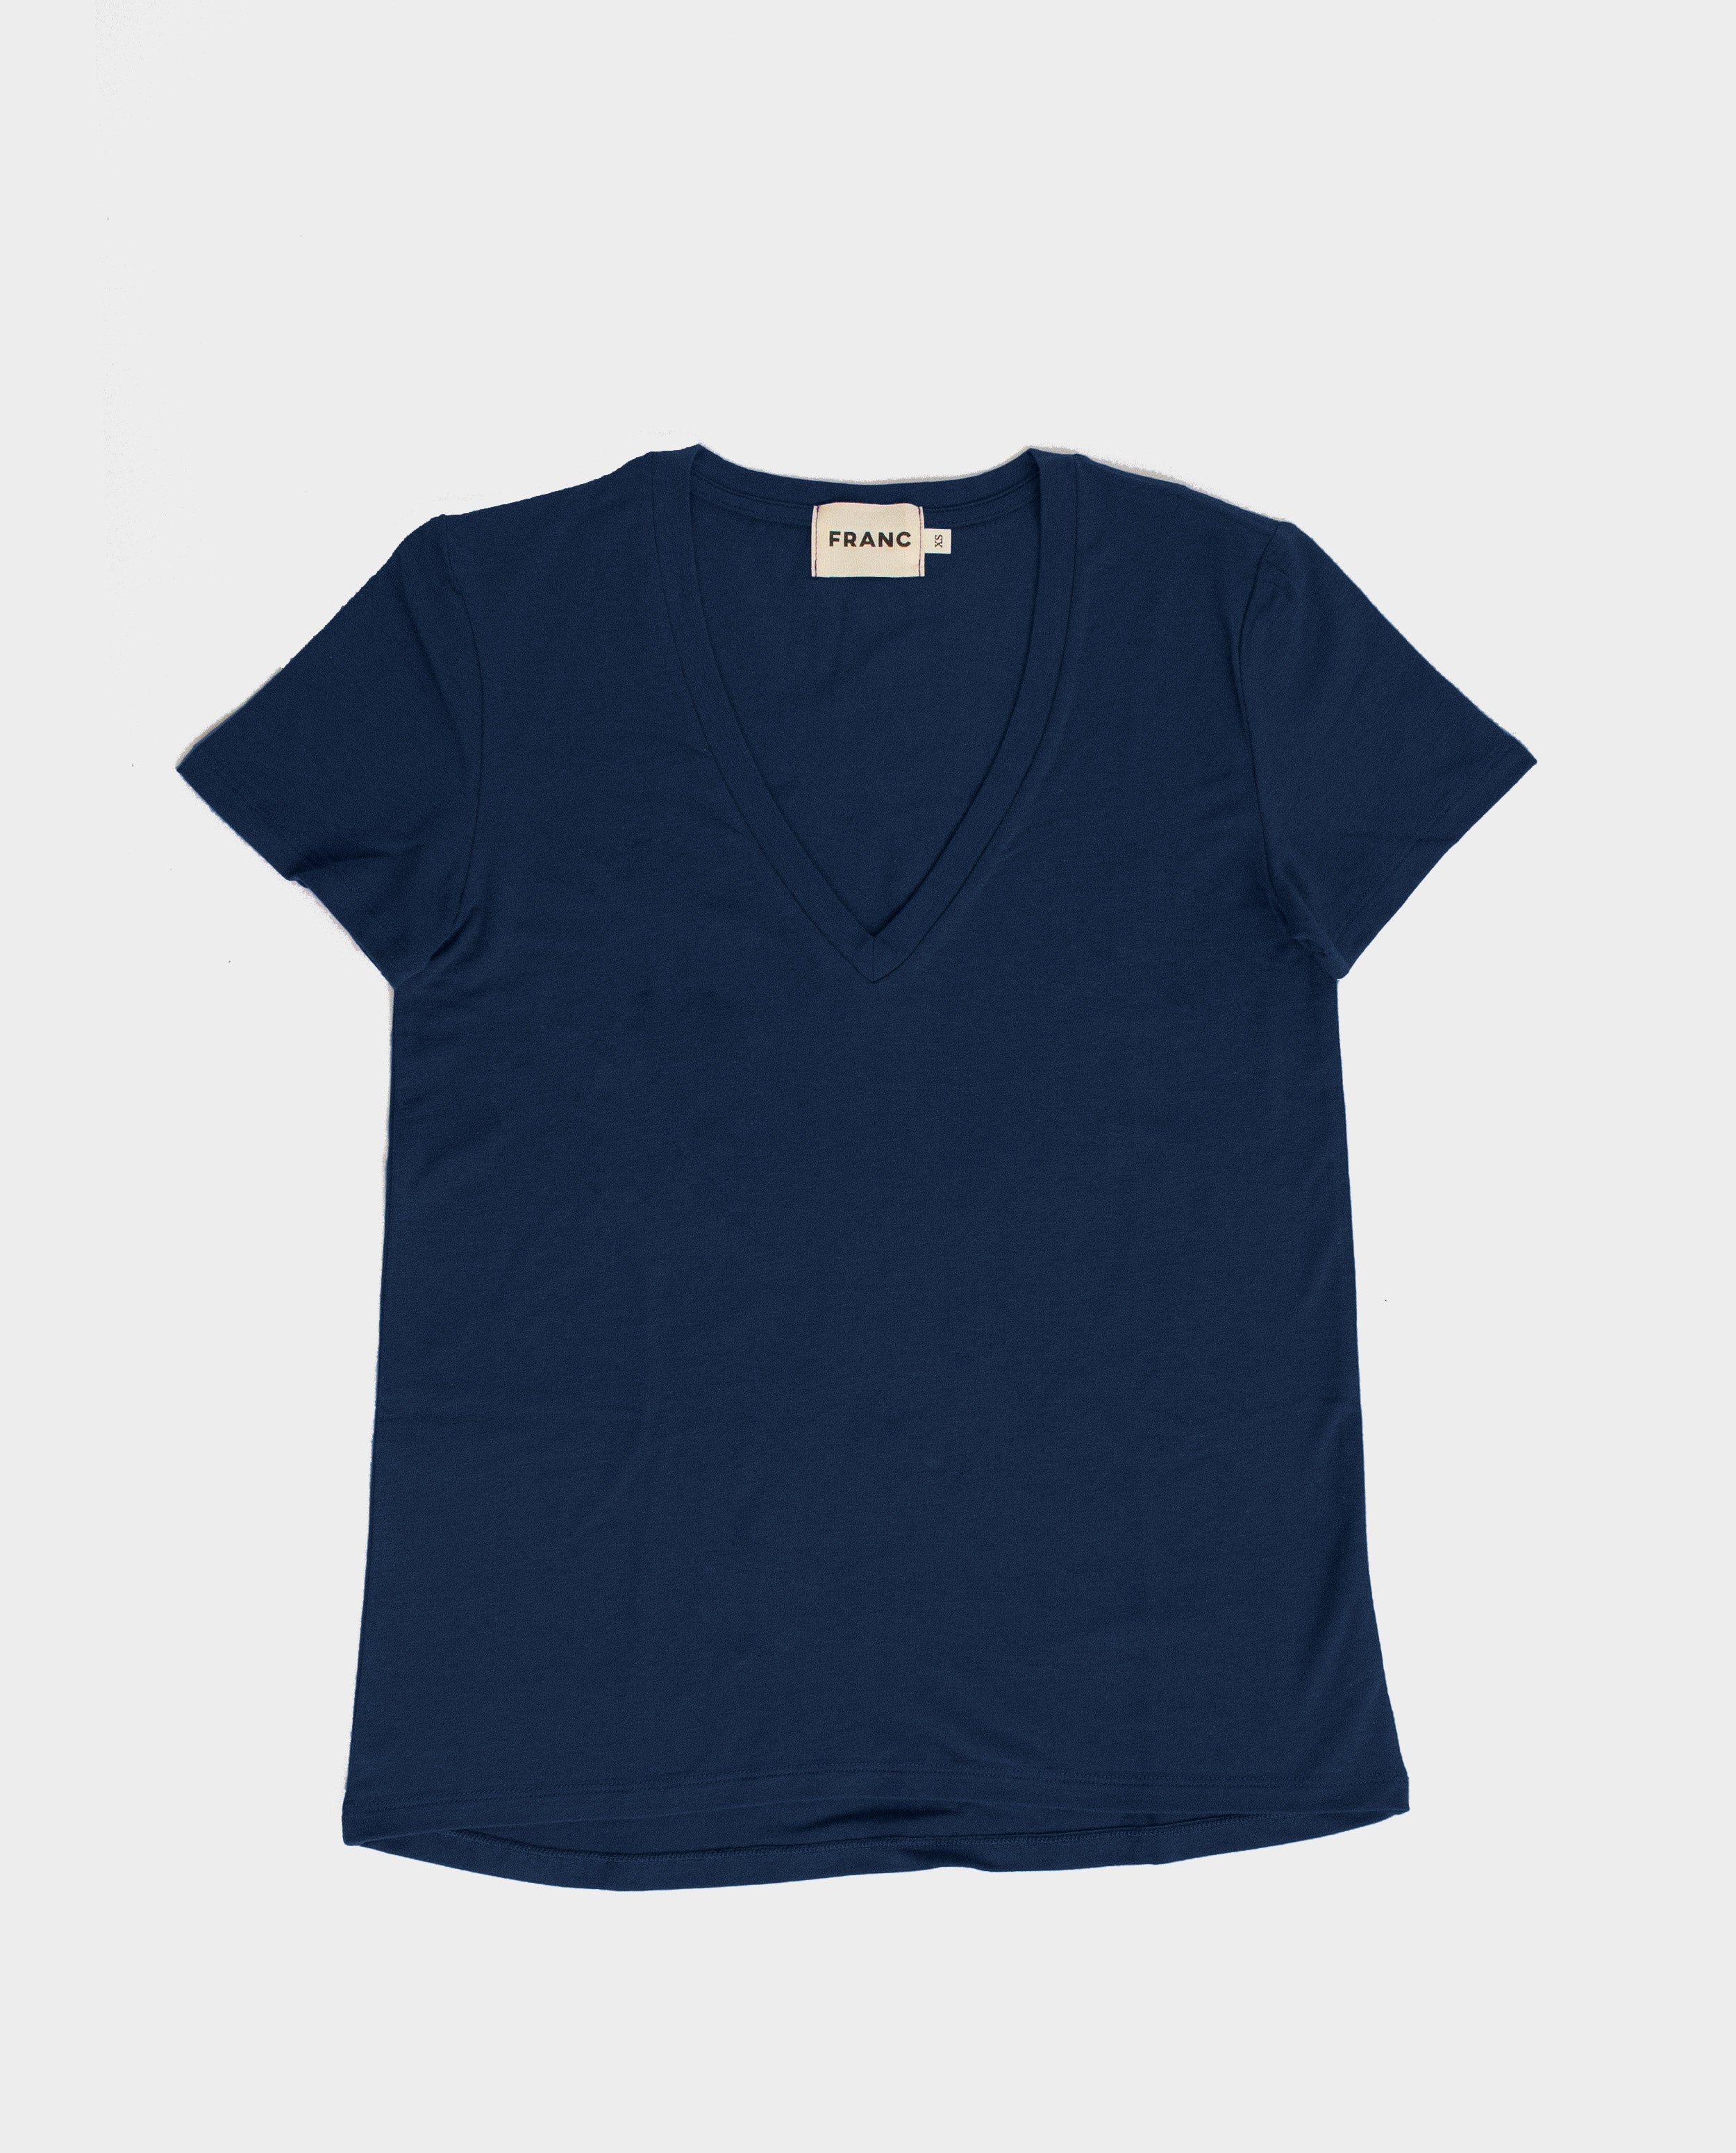 The V-Neck Tee in Admiral | FRANC Sustainable Clothing